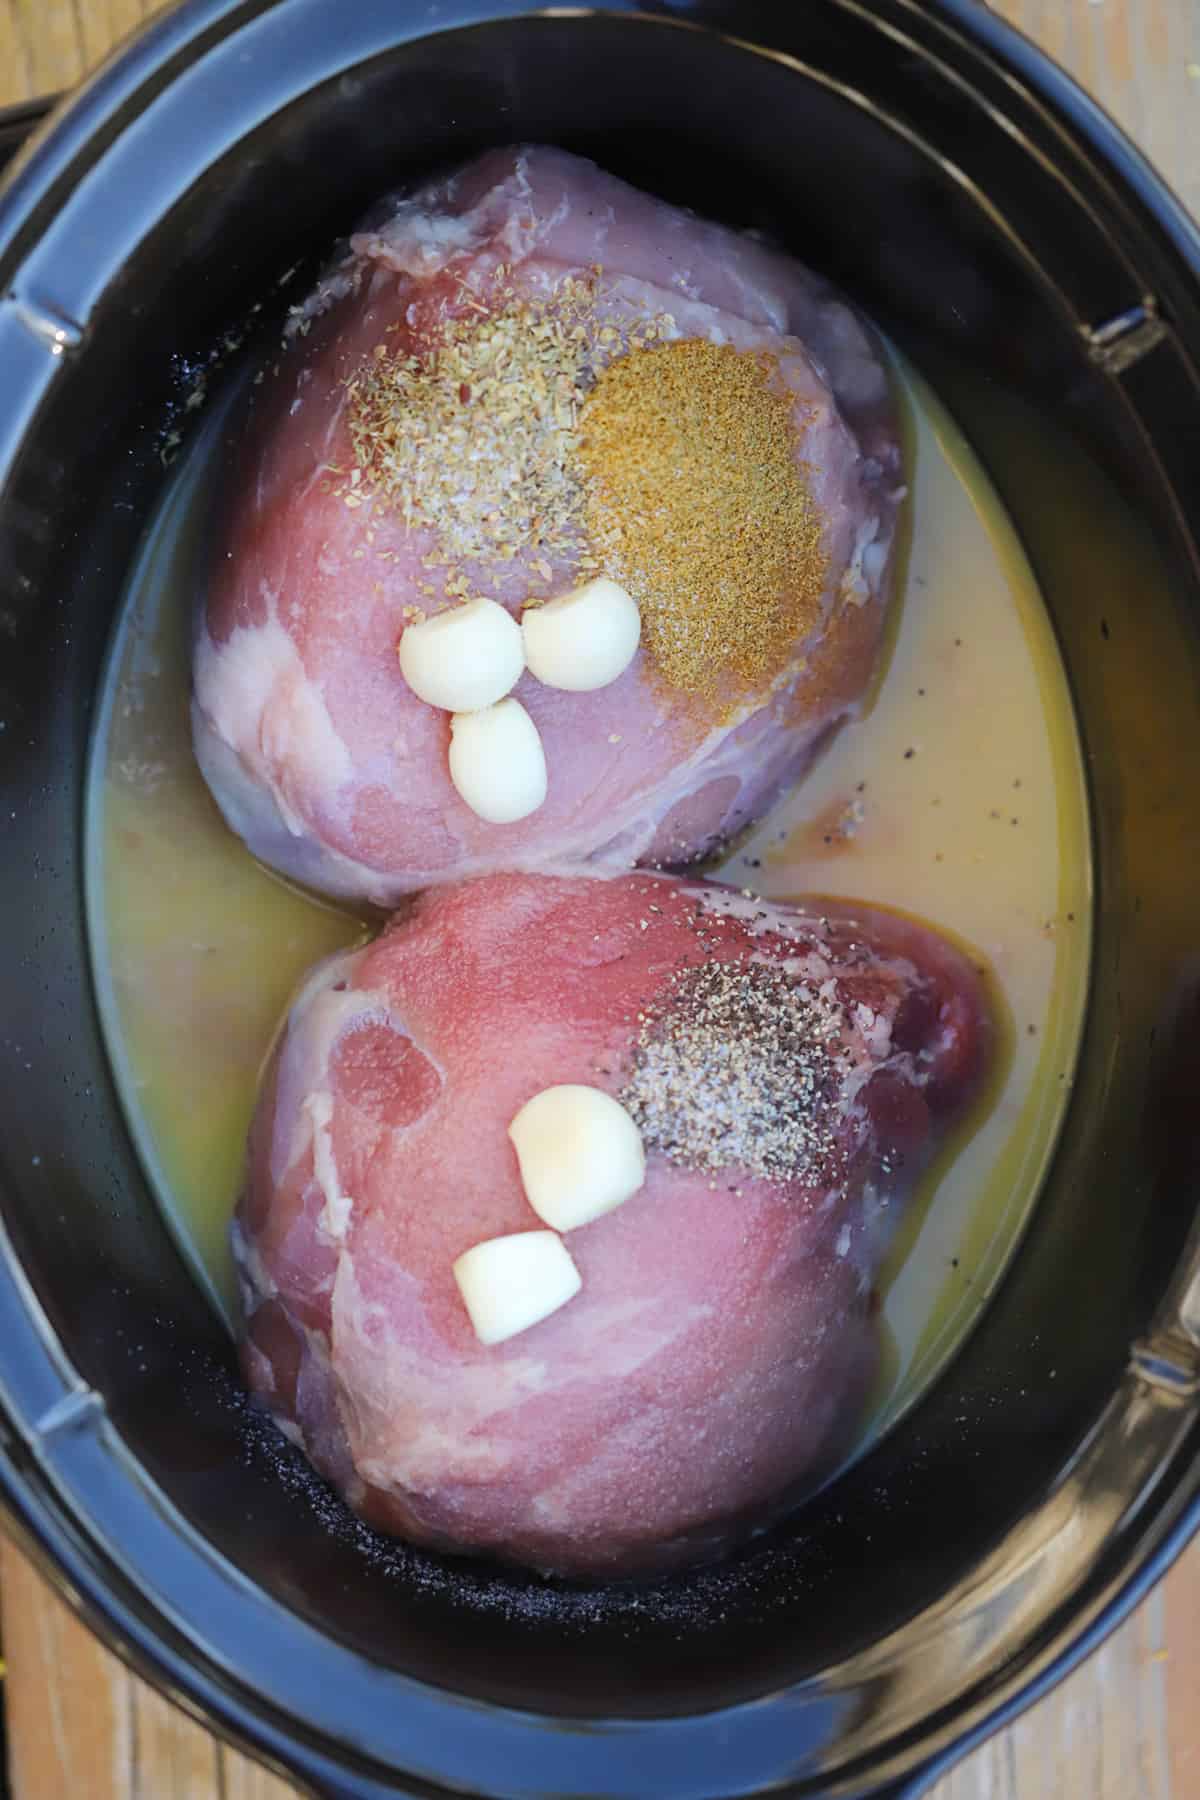 Raw pork in a slow cooker along with garlic, spices and broth.